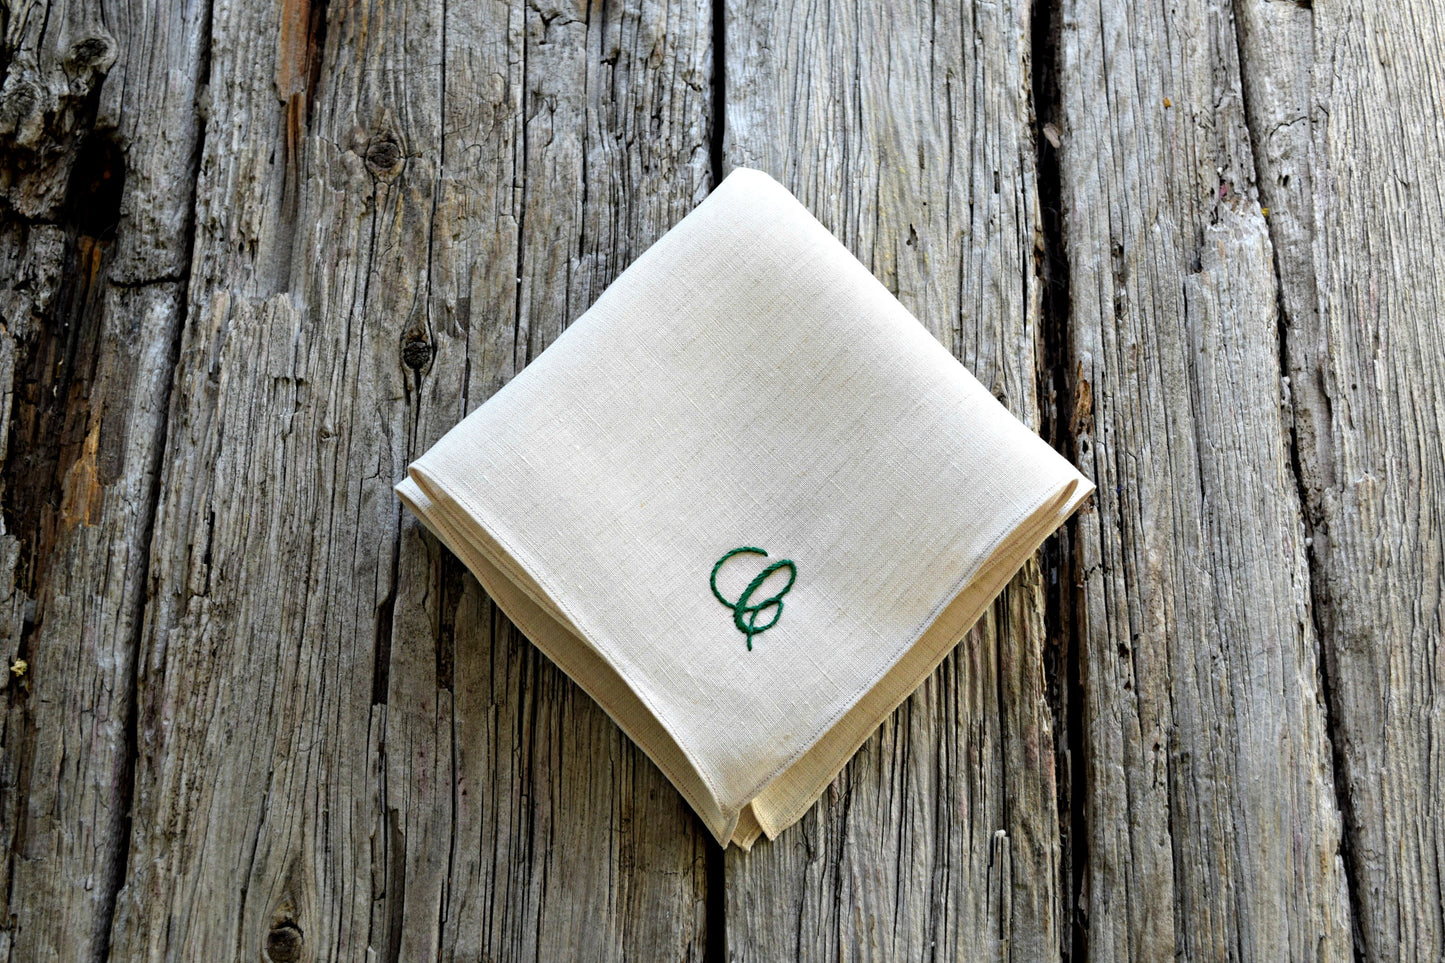 Irish linen handkerchief in oatmeal, hand embroidered with cursive green letter C